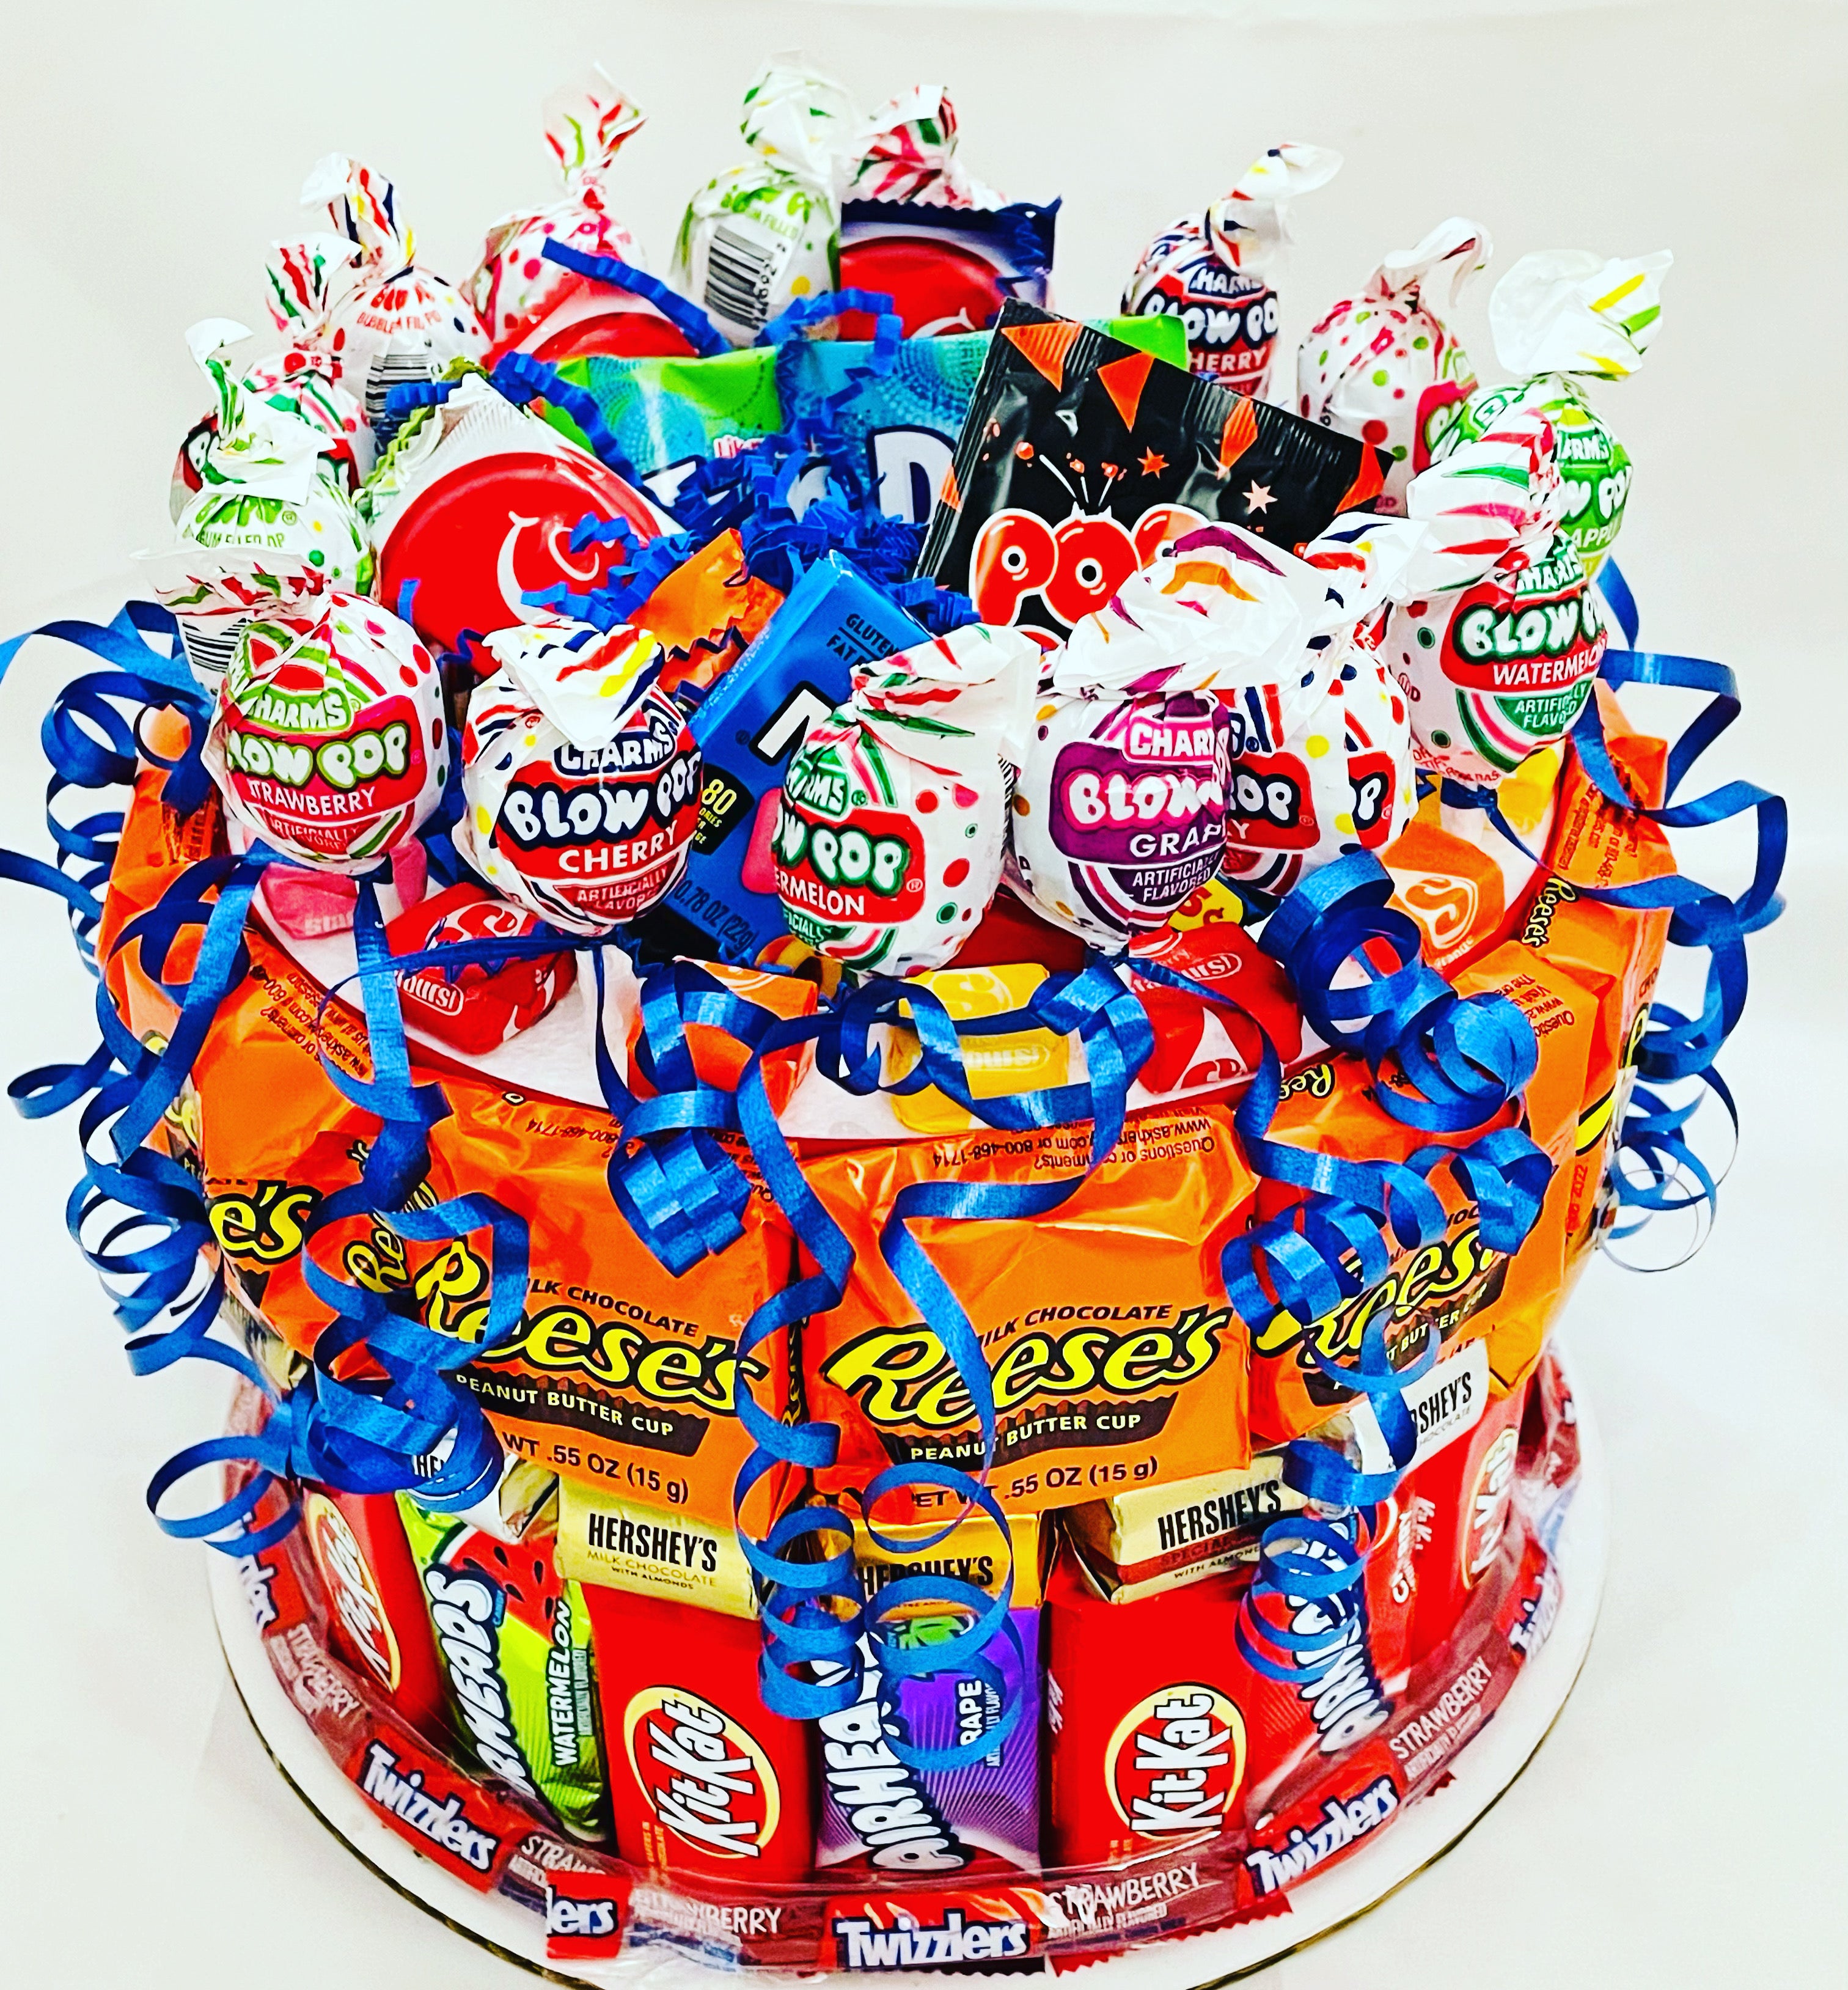 Birthday Cake Explosion Box With Candy Kaboom  York peppermint patty,  Chocolate gift boxes, Reeses peanut butter cups